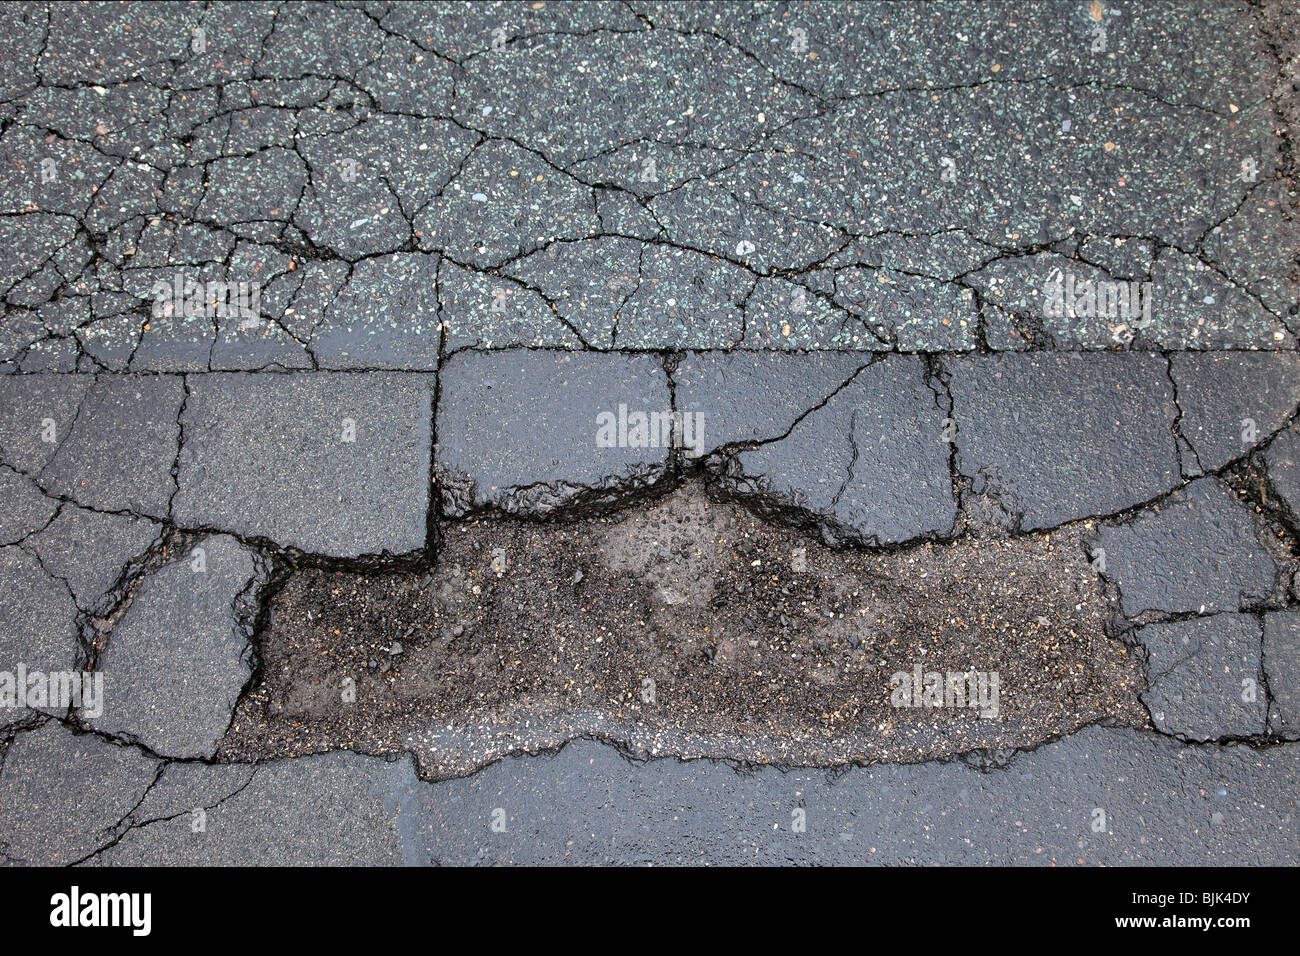 Asphalt cracked by frost and cold, potholes in Berlin, Germany, Europe Stock Photo